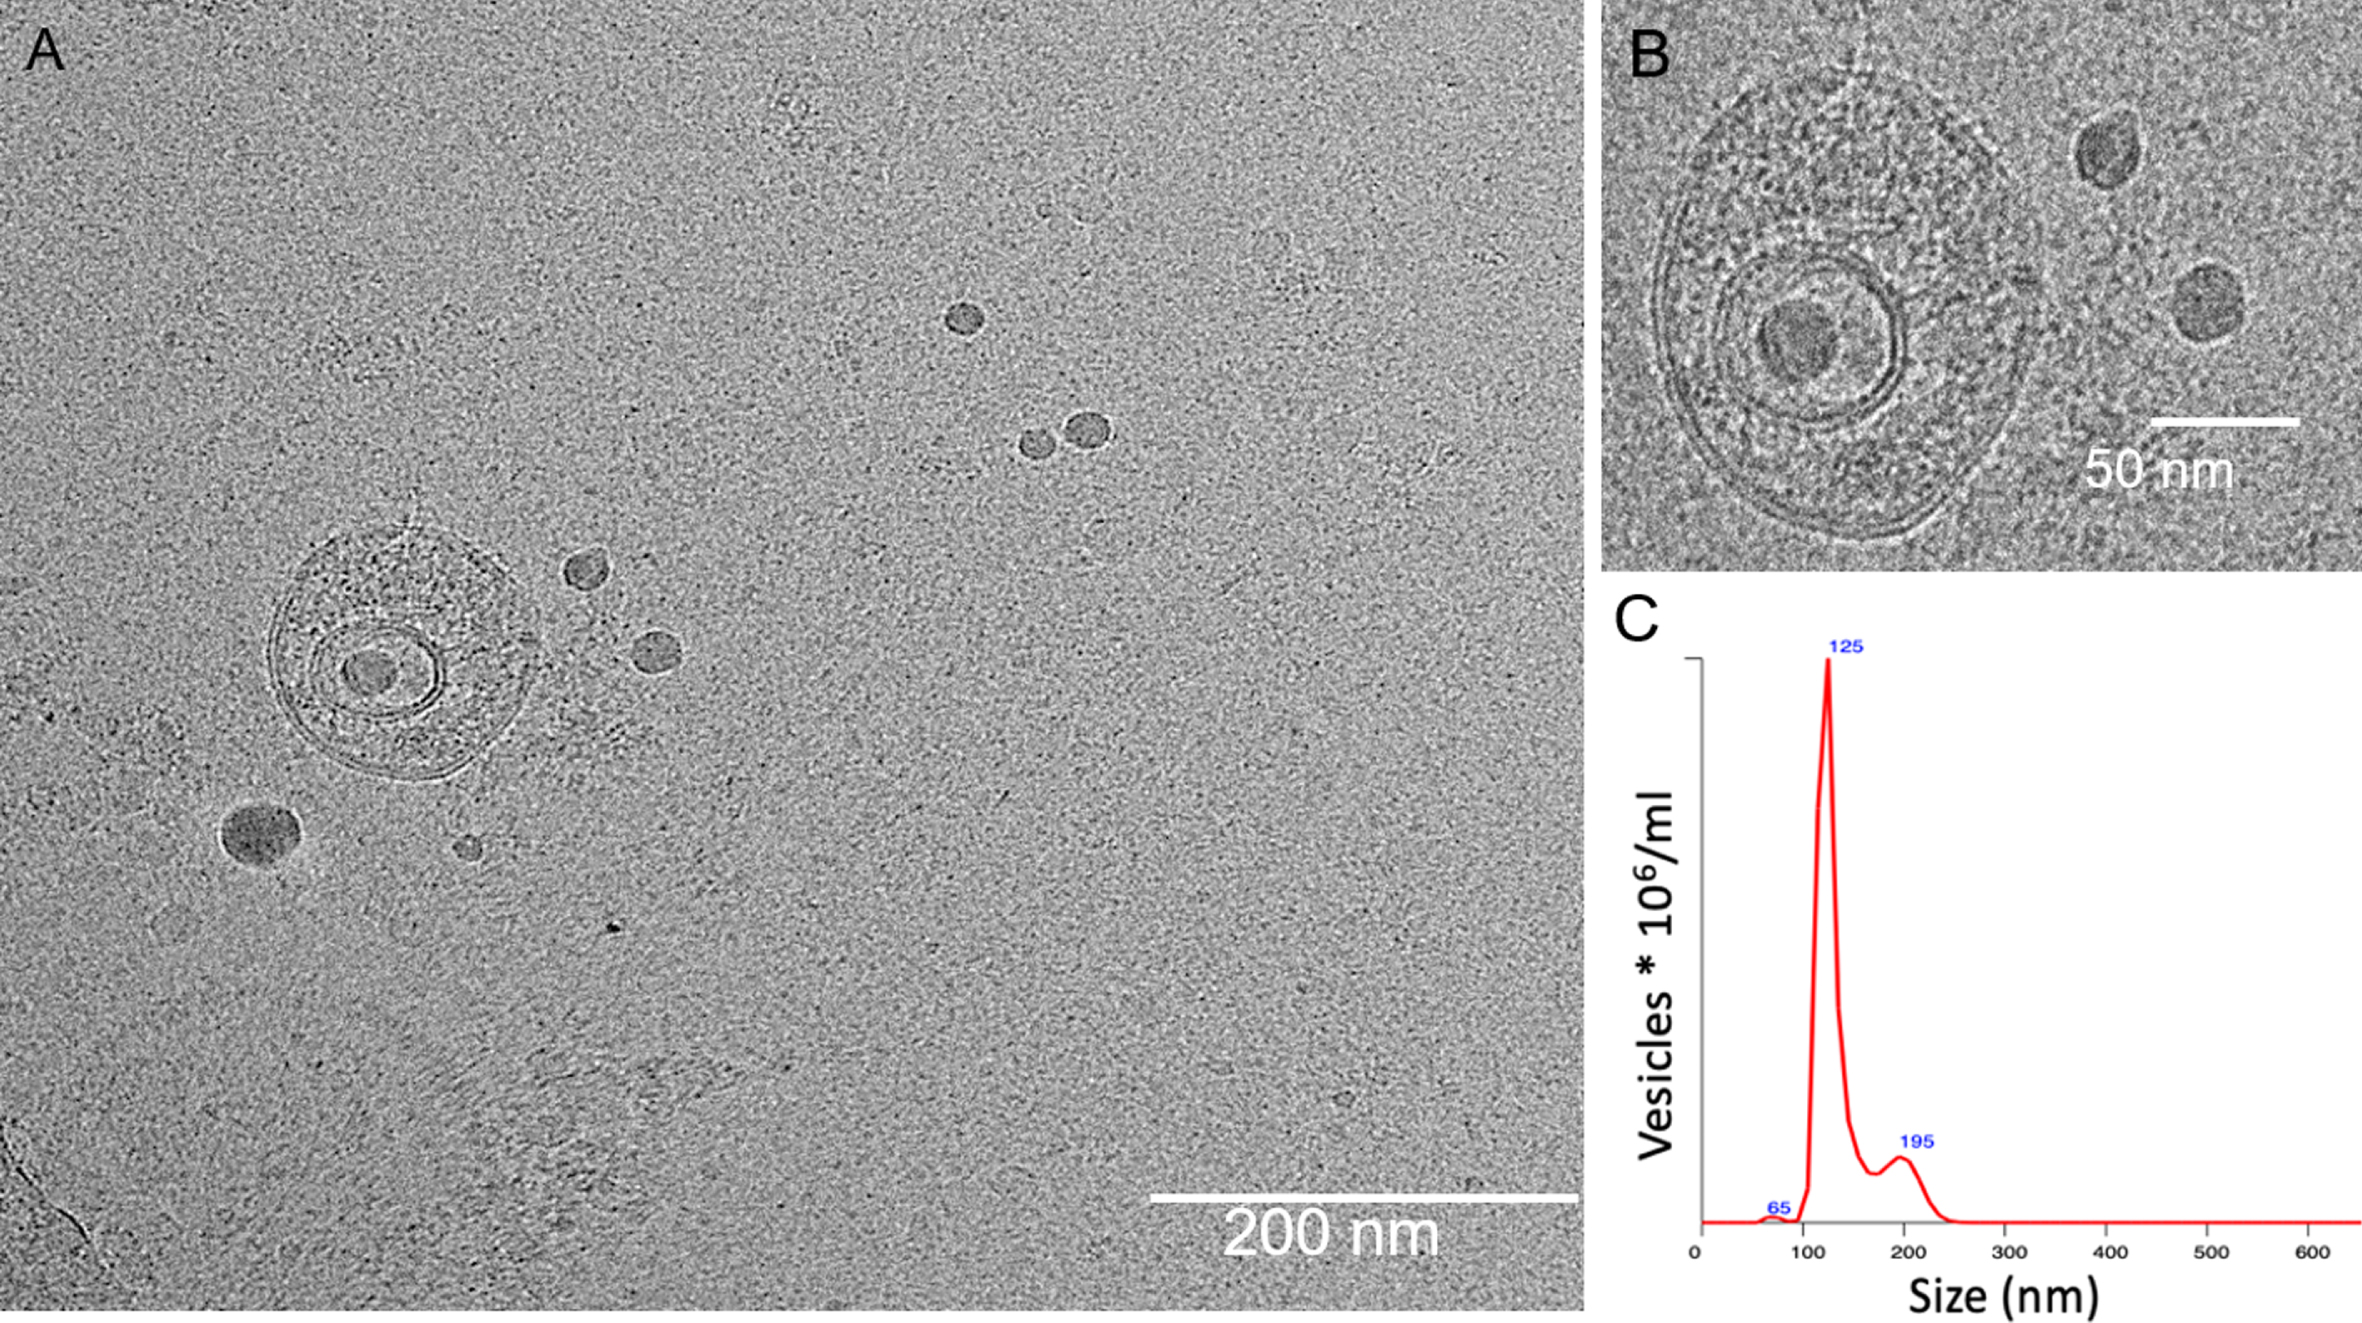 Cryo-transmission electron microscopy images of exosomes isolated from CSF sample. (A) Double-walled membrane vesicles identified from CSF sample. (B) High-resolution micrograph of the double-walled membrane vesicle. Scale bar (A) 200 nm and (B) 50 nm, respectively. (C) Size distribution and concentration of isolated exosomes evaluated by Nanosight.